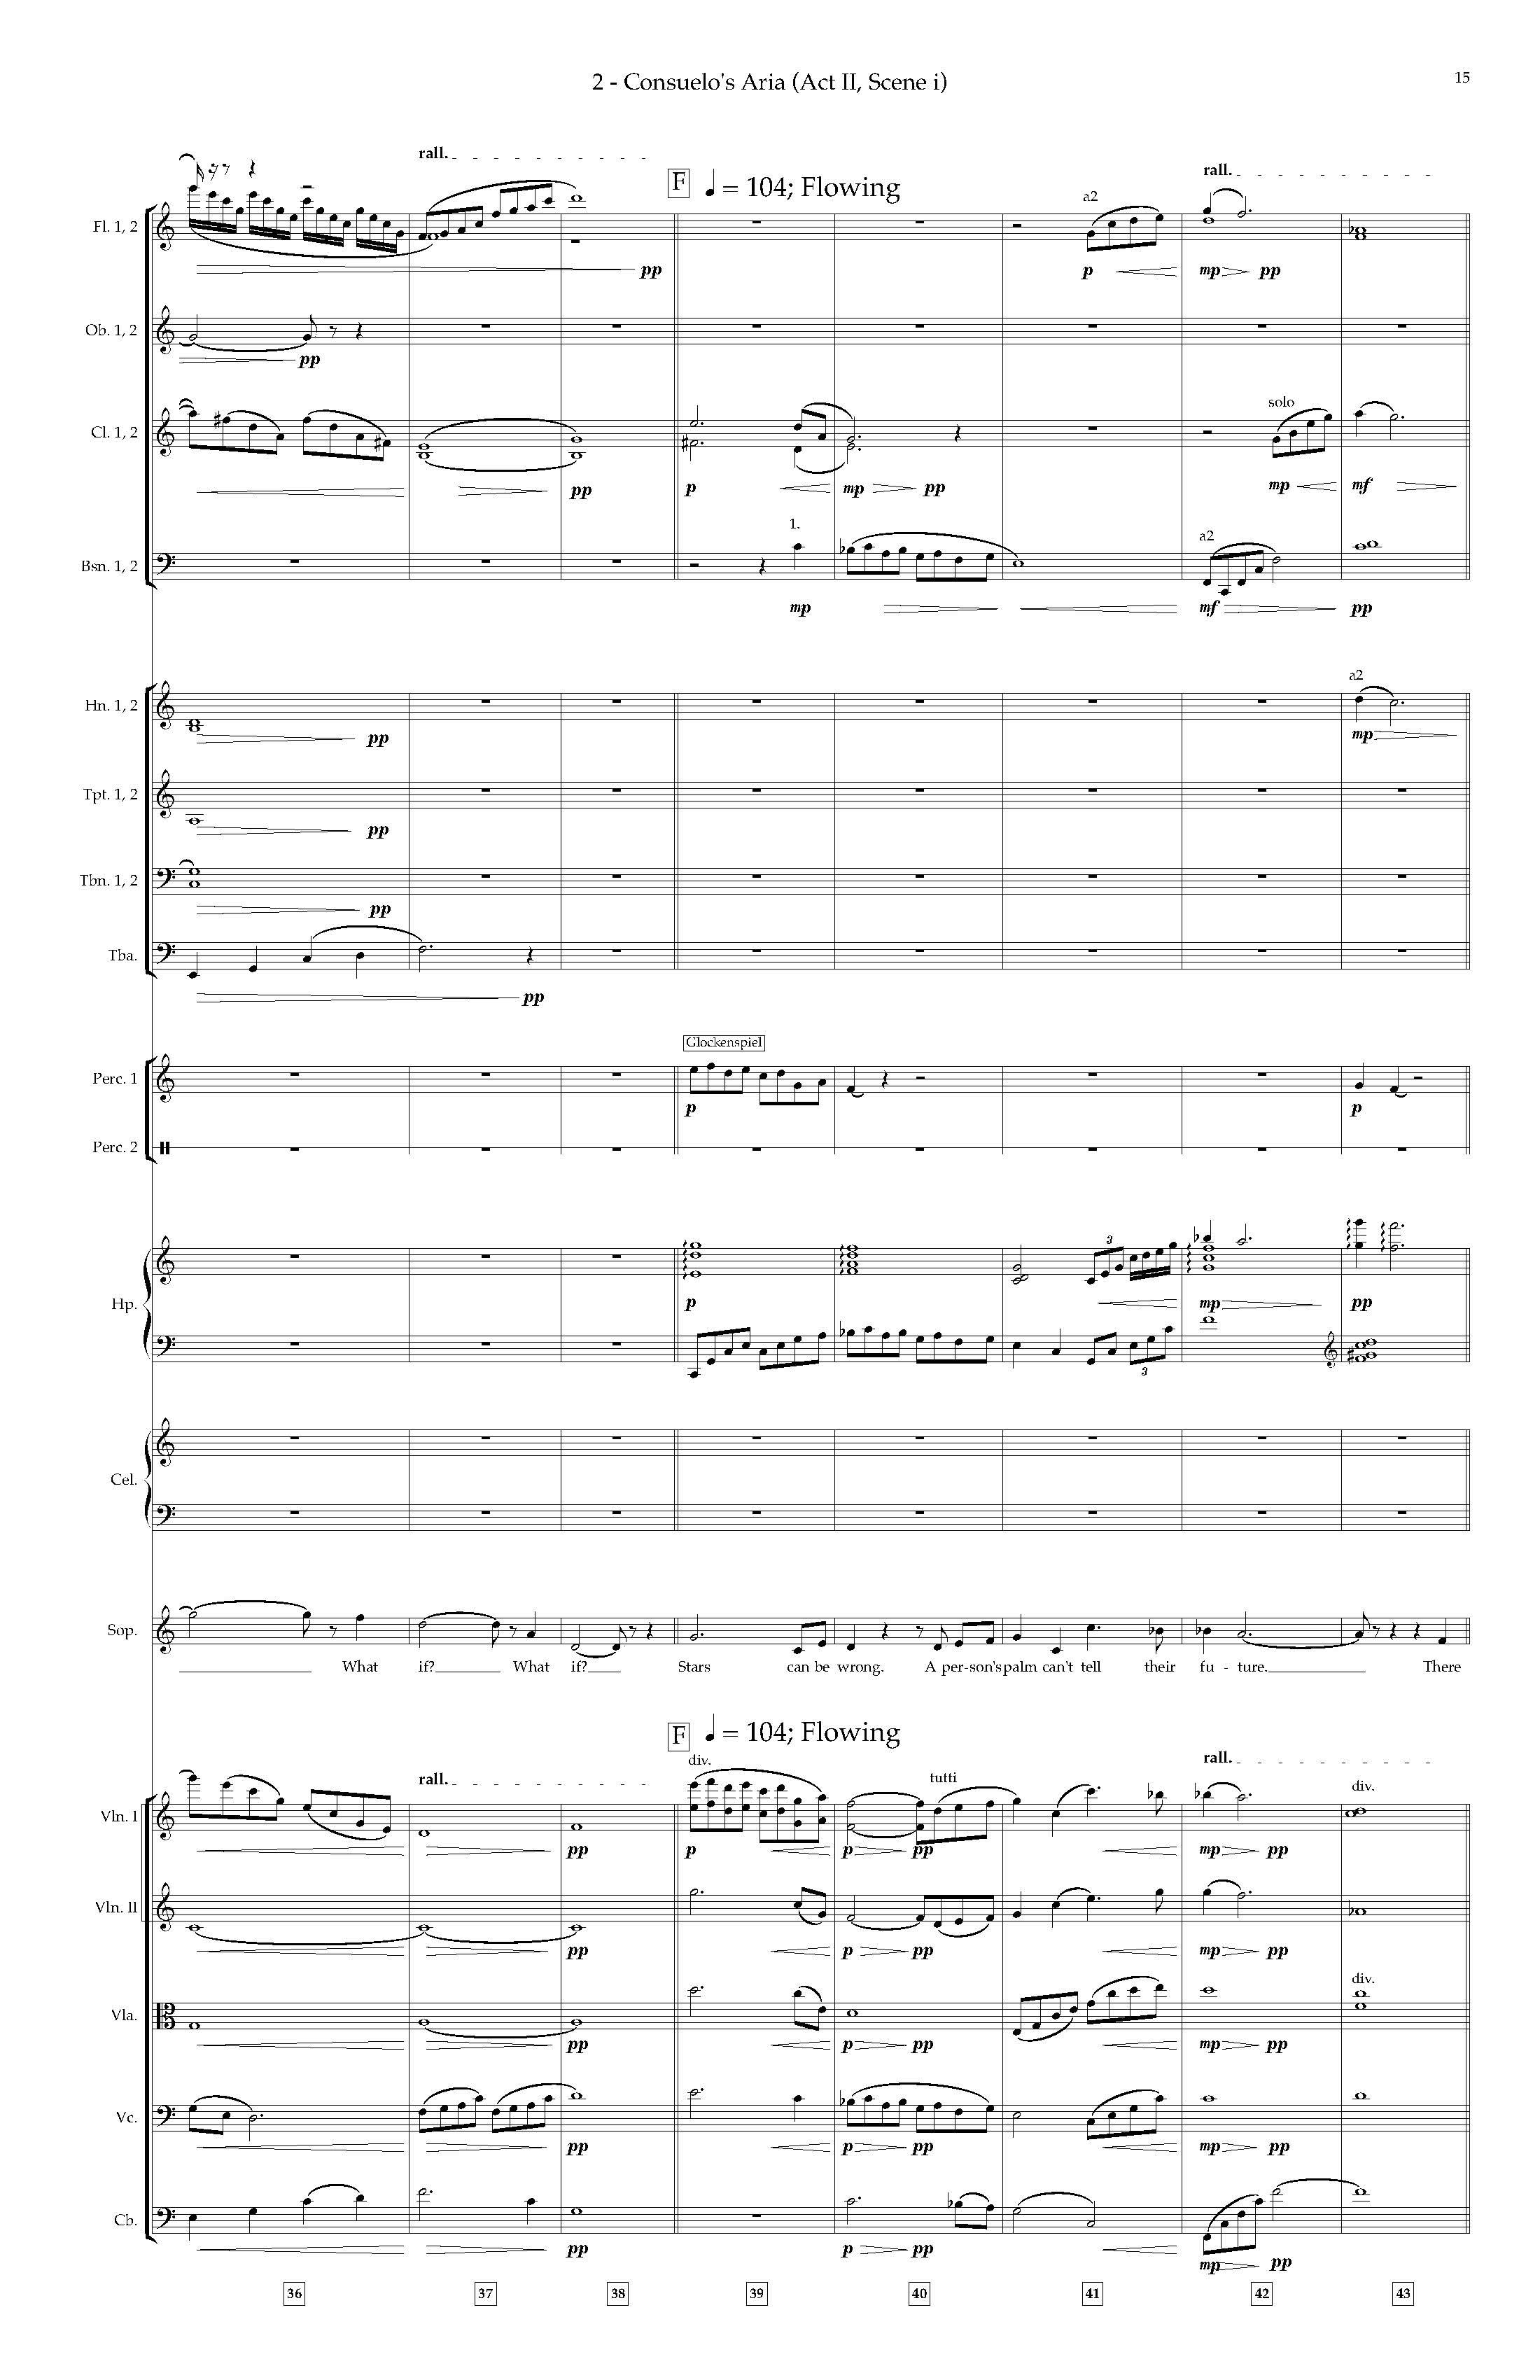 Arias and Interludes from HWGS - Complete Score_Page_21.jpg